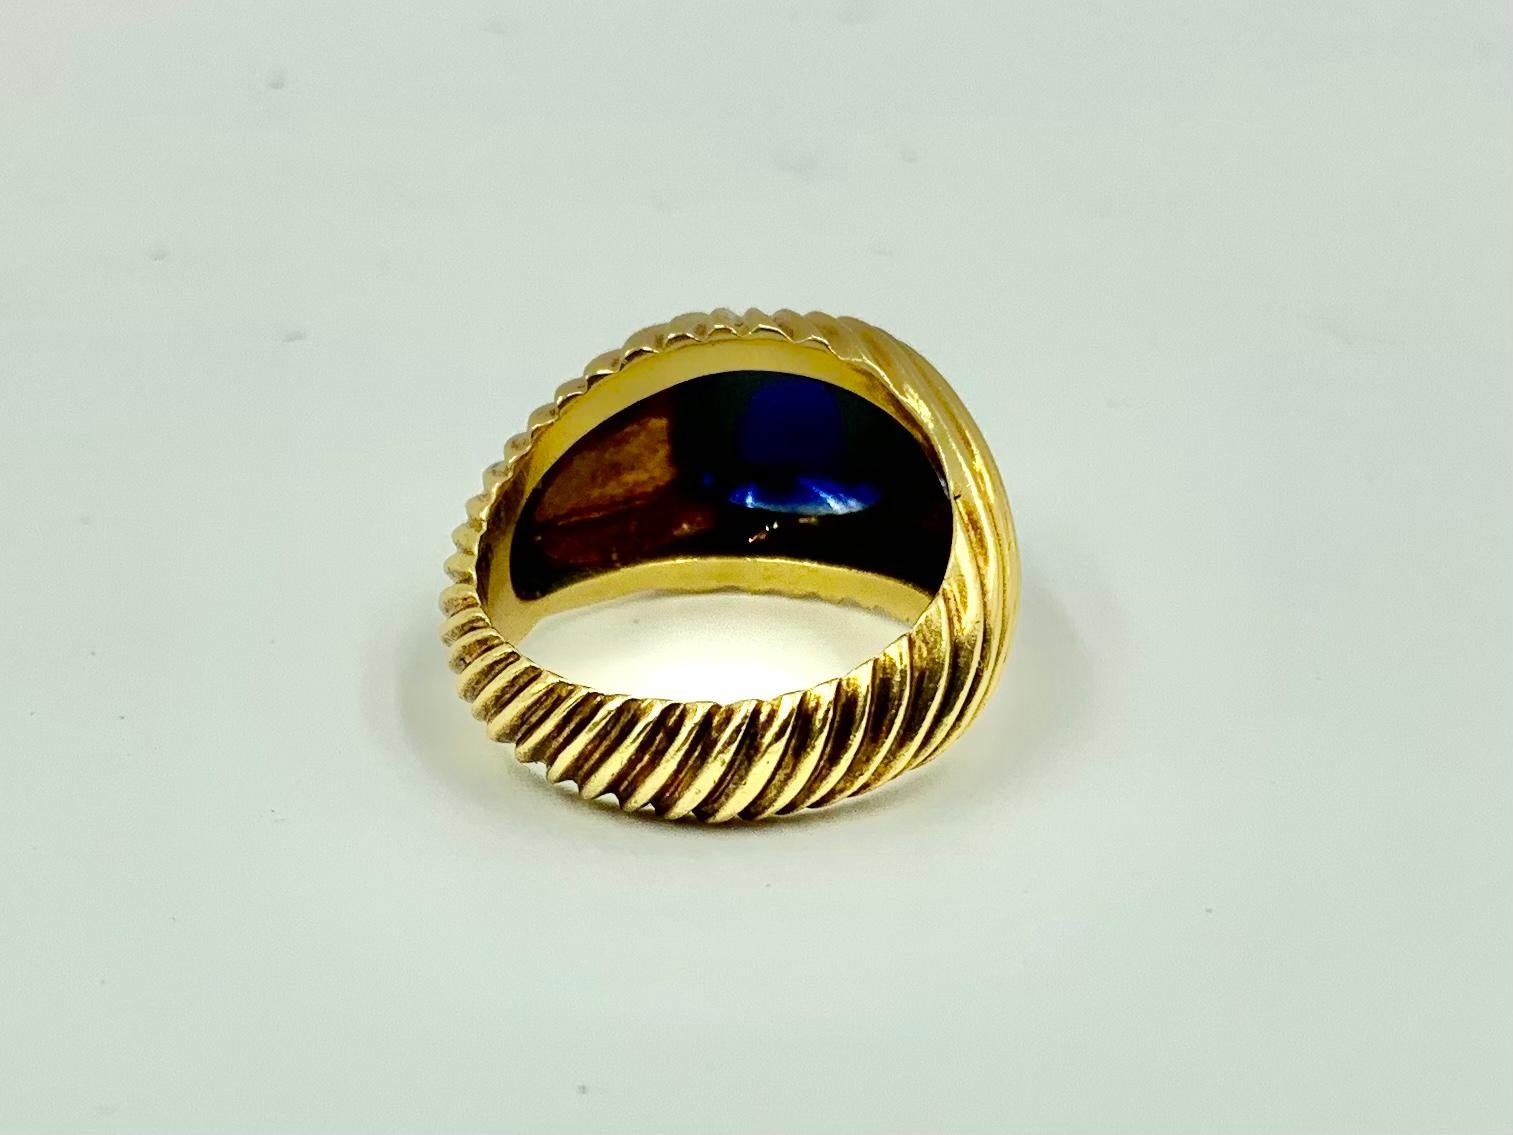 Vintage Sugarloaf Cabochon Sapphire 18K Yellow Gold Tourbillon Twist Ring For Sale 6